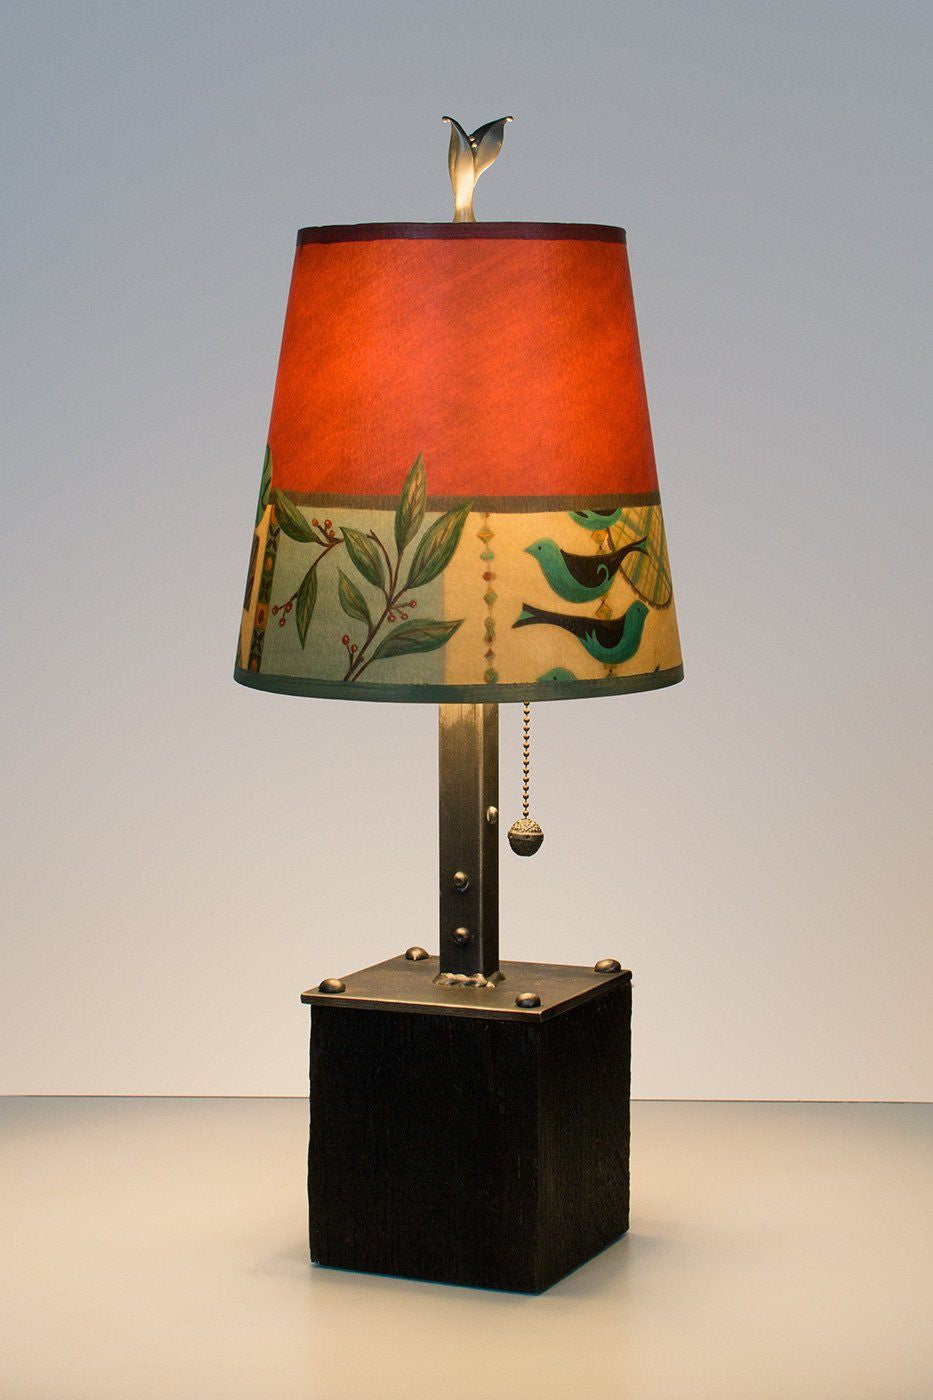 Janna Ugone &amp; Co Table Lamps Steel Table Lamp on Reclaimed Wood with Small Drum Shade in New Capri